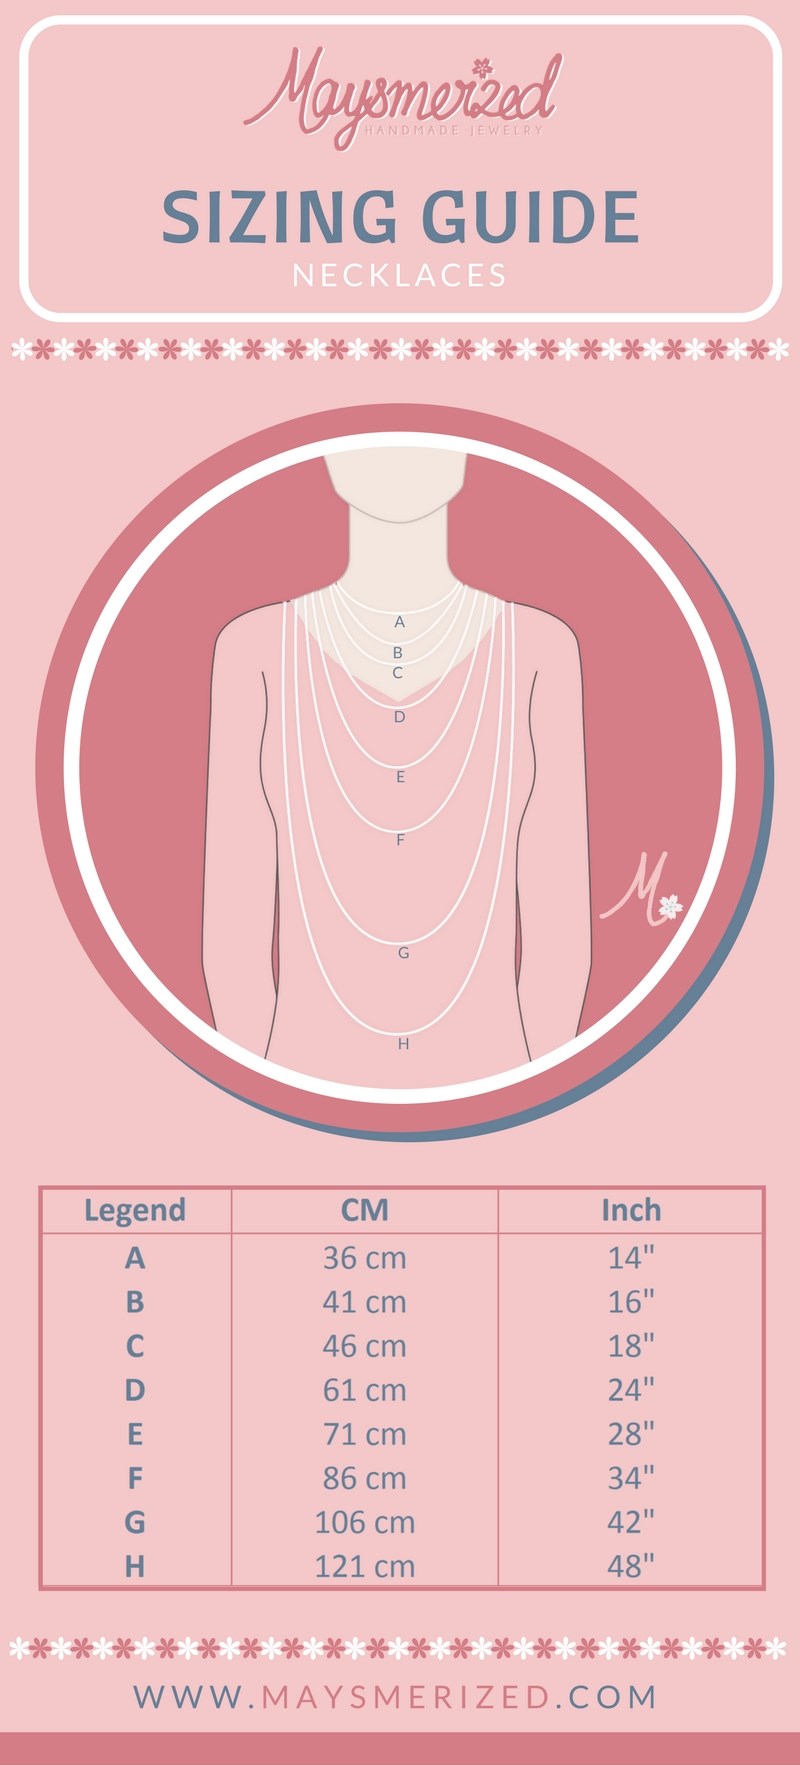 Sizing Guide - Necklaces - Maysmerized Handmade Jewelry and Accessories from Malaysia